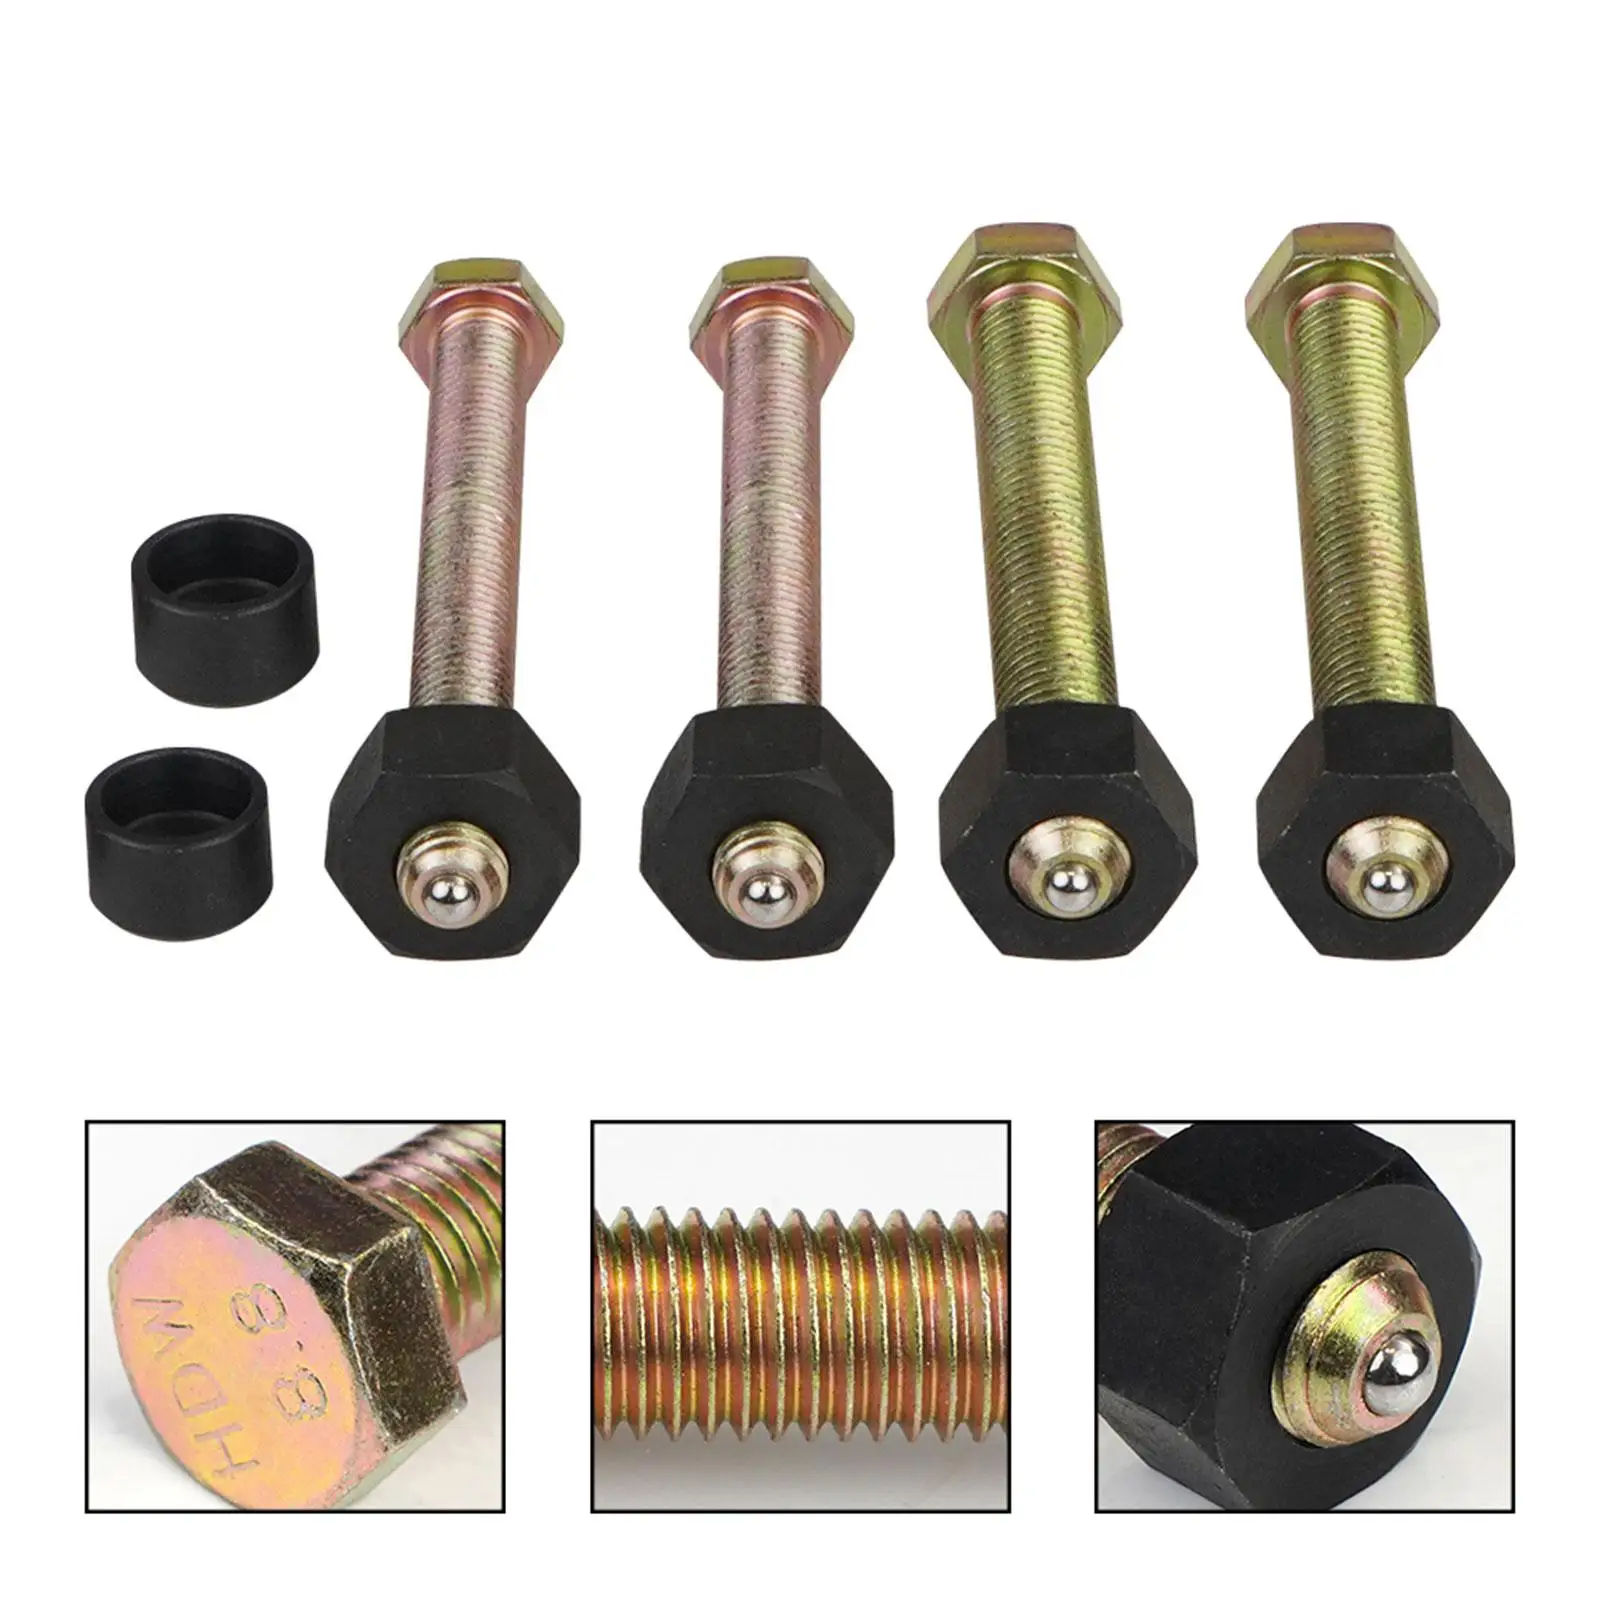 78834 Repair Parts Metal Bolts Replacement Impact Rated Hub Removal Bolt Set